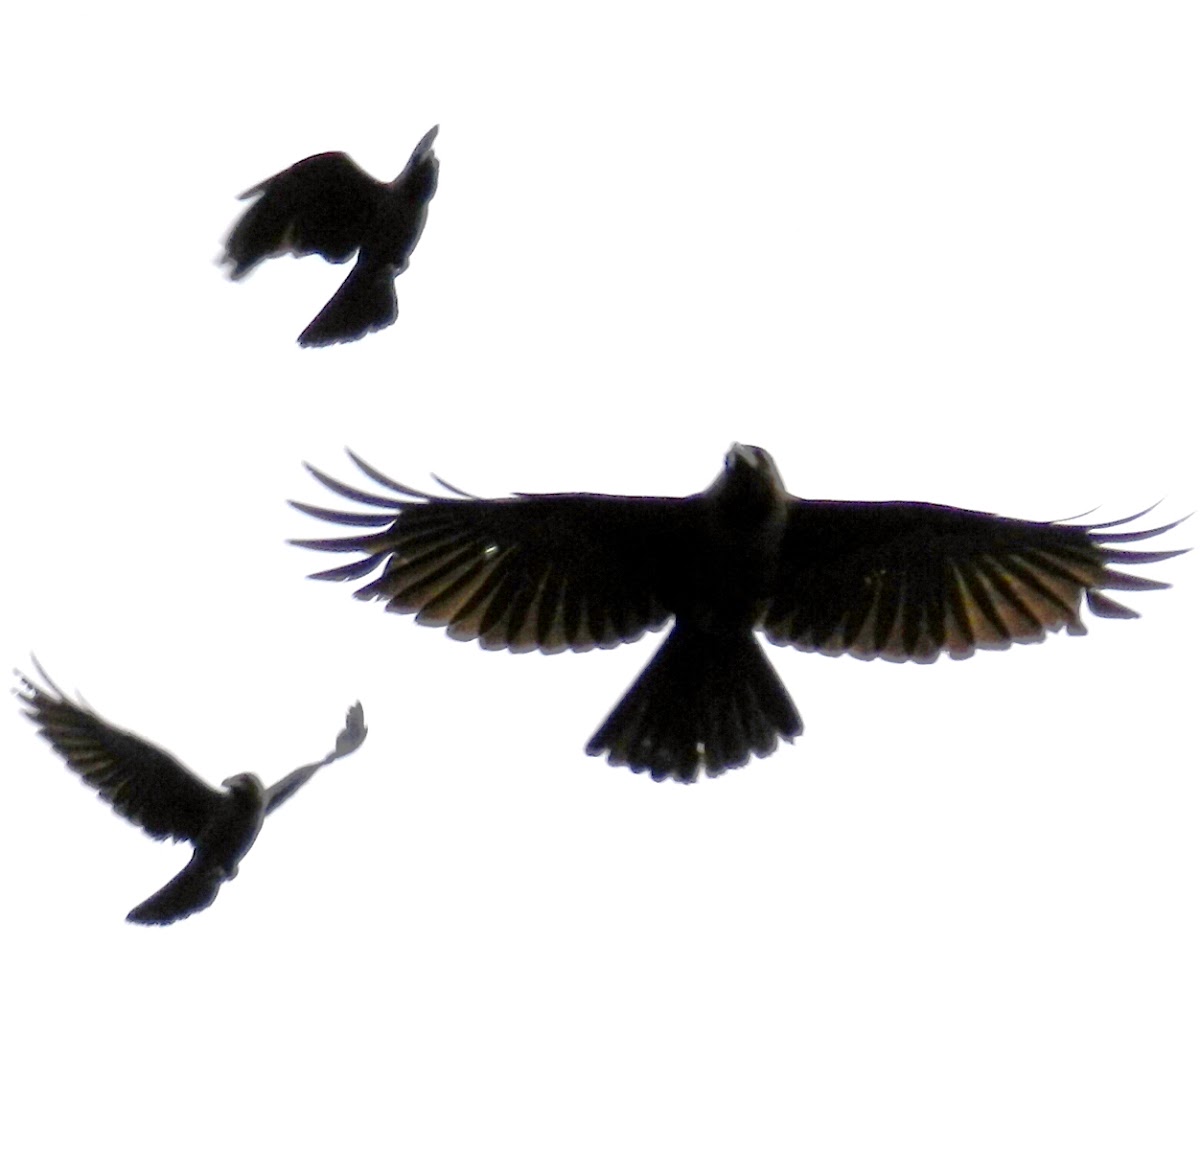 The House Crow in flight